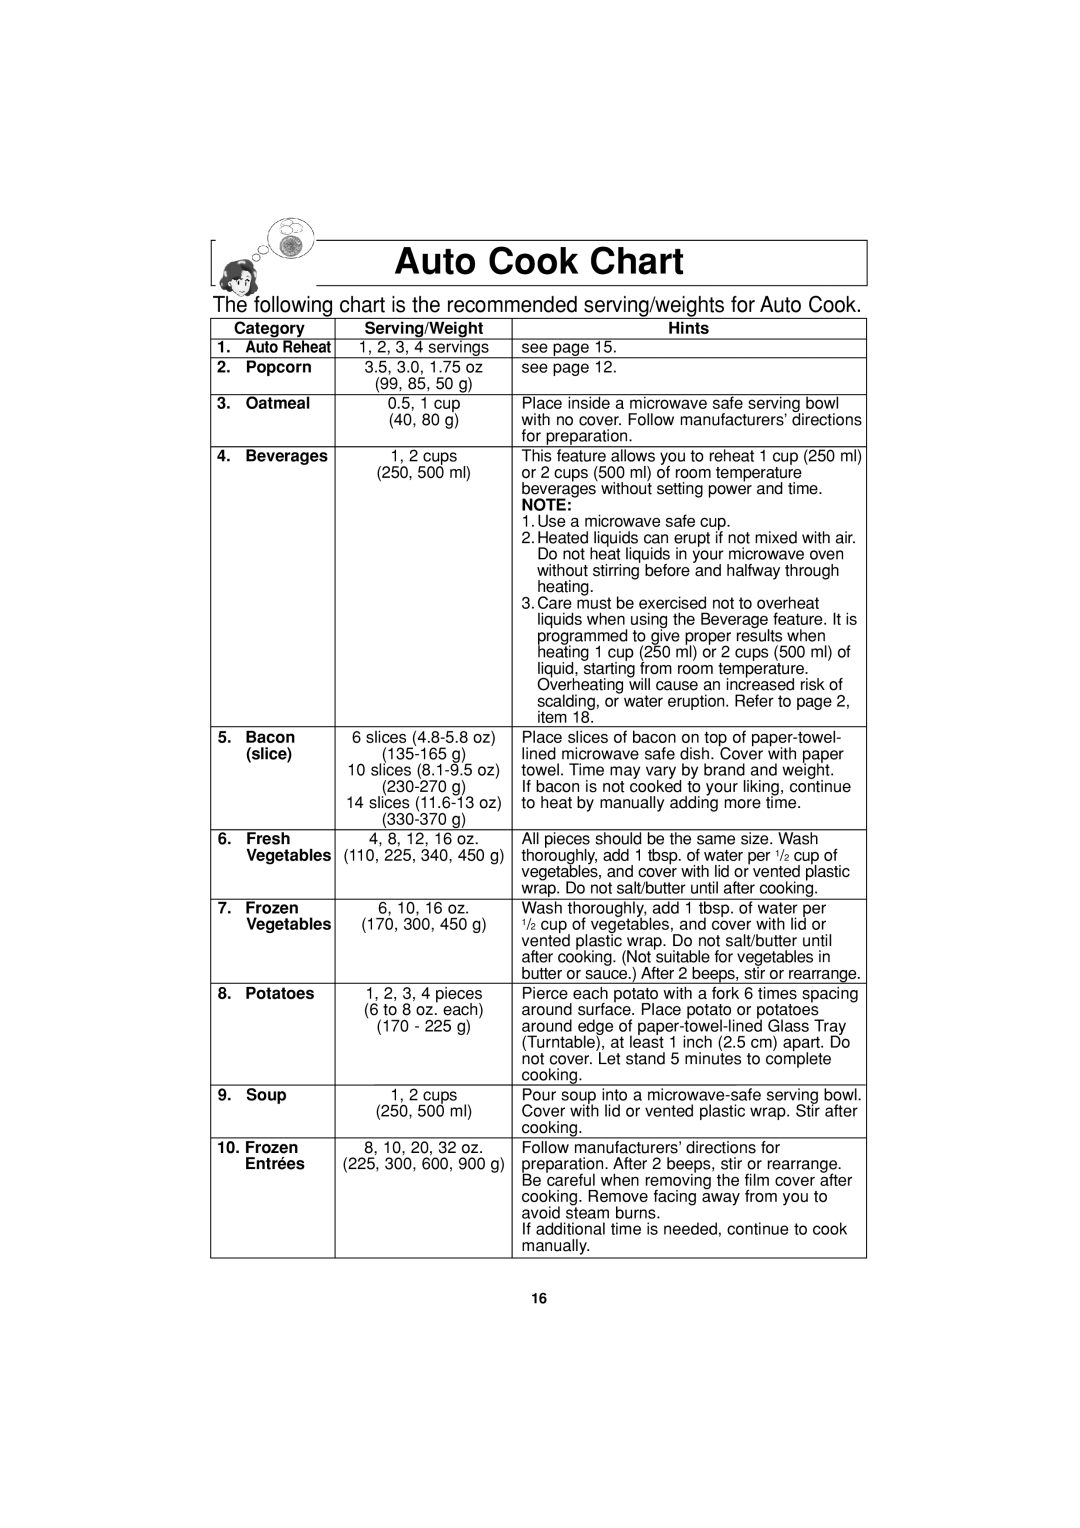 Panasonic NN-S334 Auto Cook Chart, Category 1.Auto Reheat 2.Popcorn 3.Oatmeal, Beverages 5.Bacon slice, Serving/Weight 